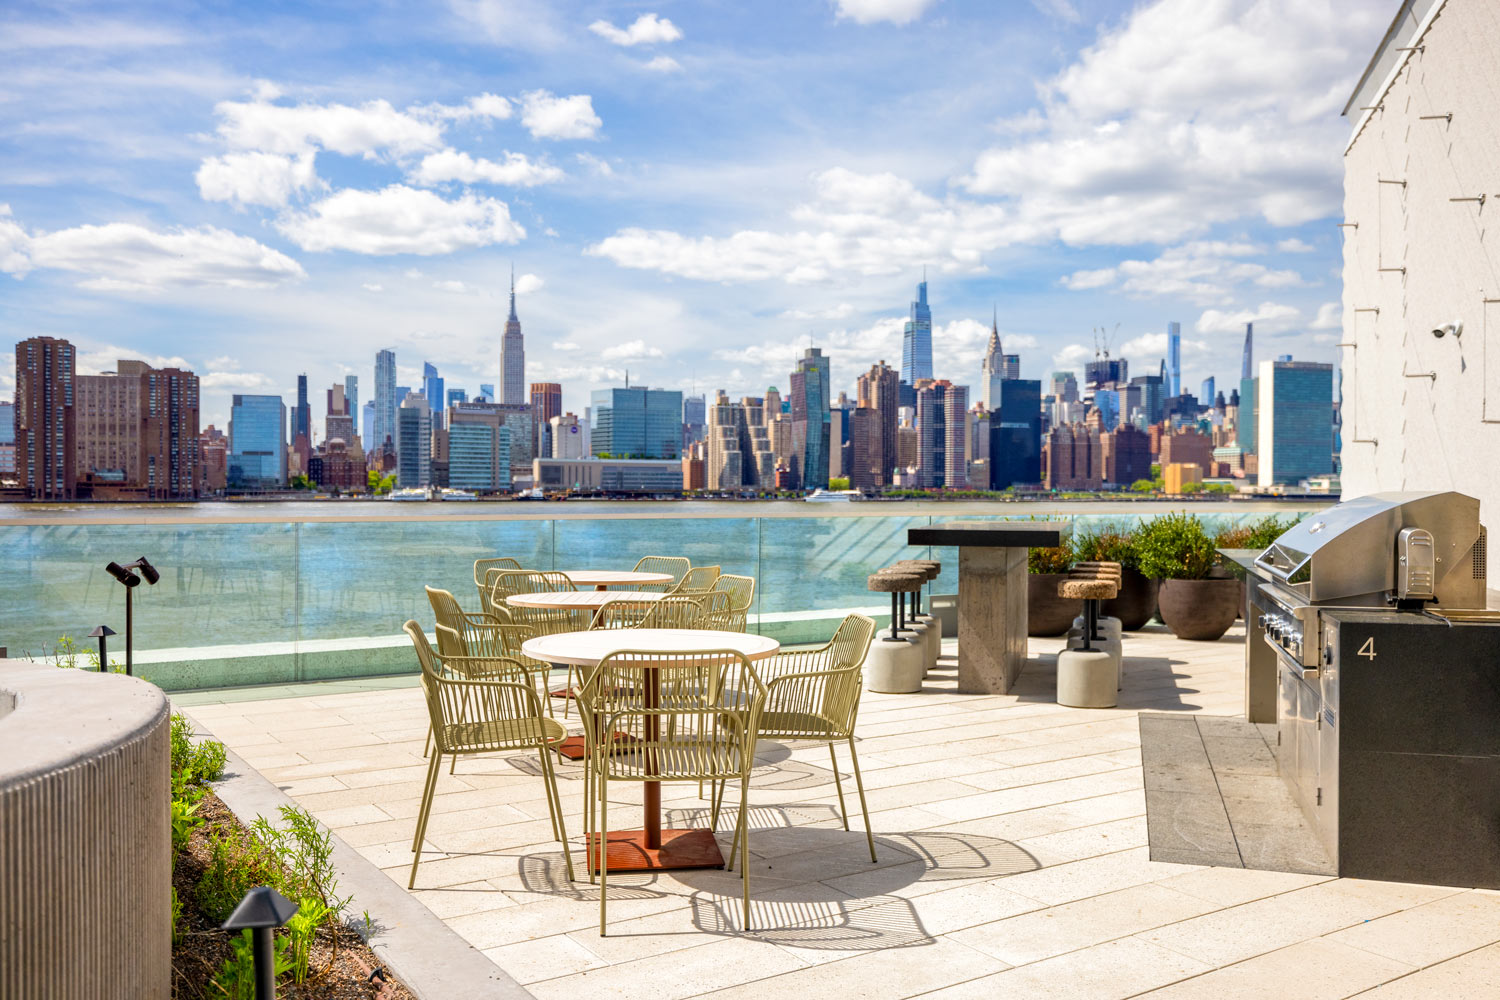 Sweeping views of Manhattan and the East River from the central terrace